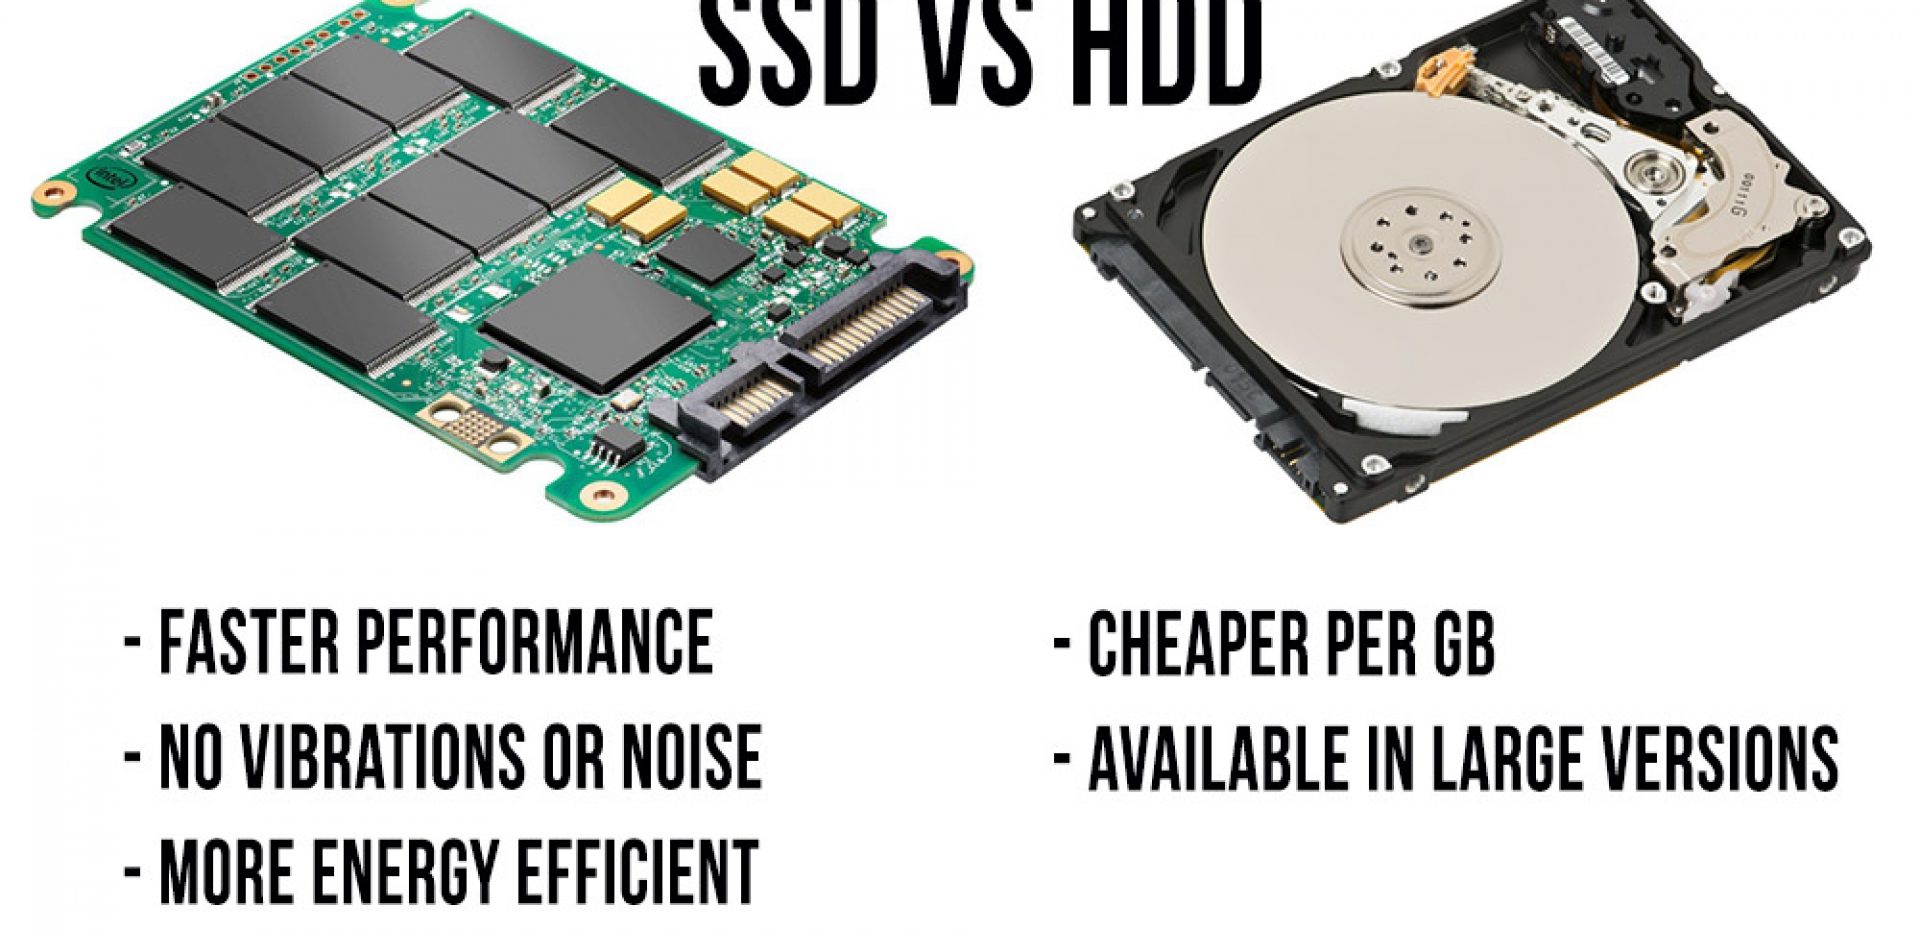 Steam ssd and hdd фото 25